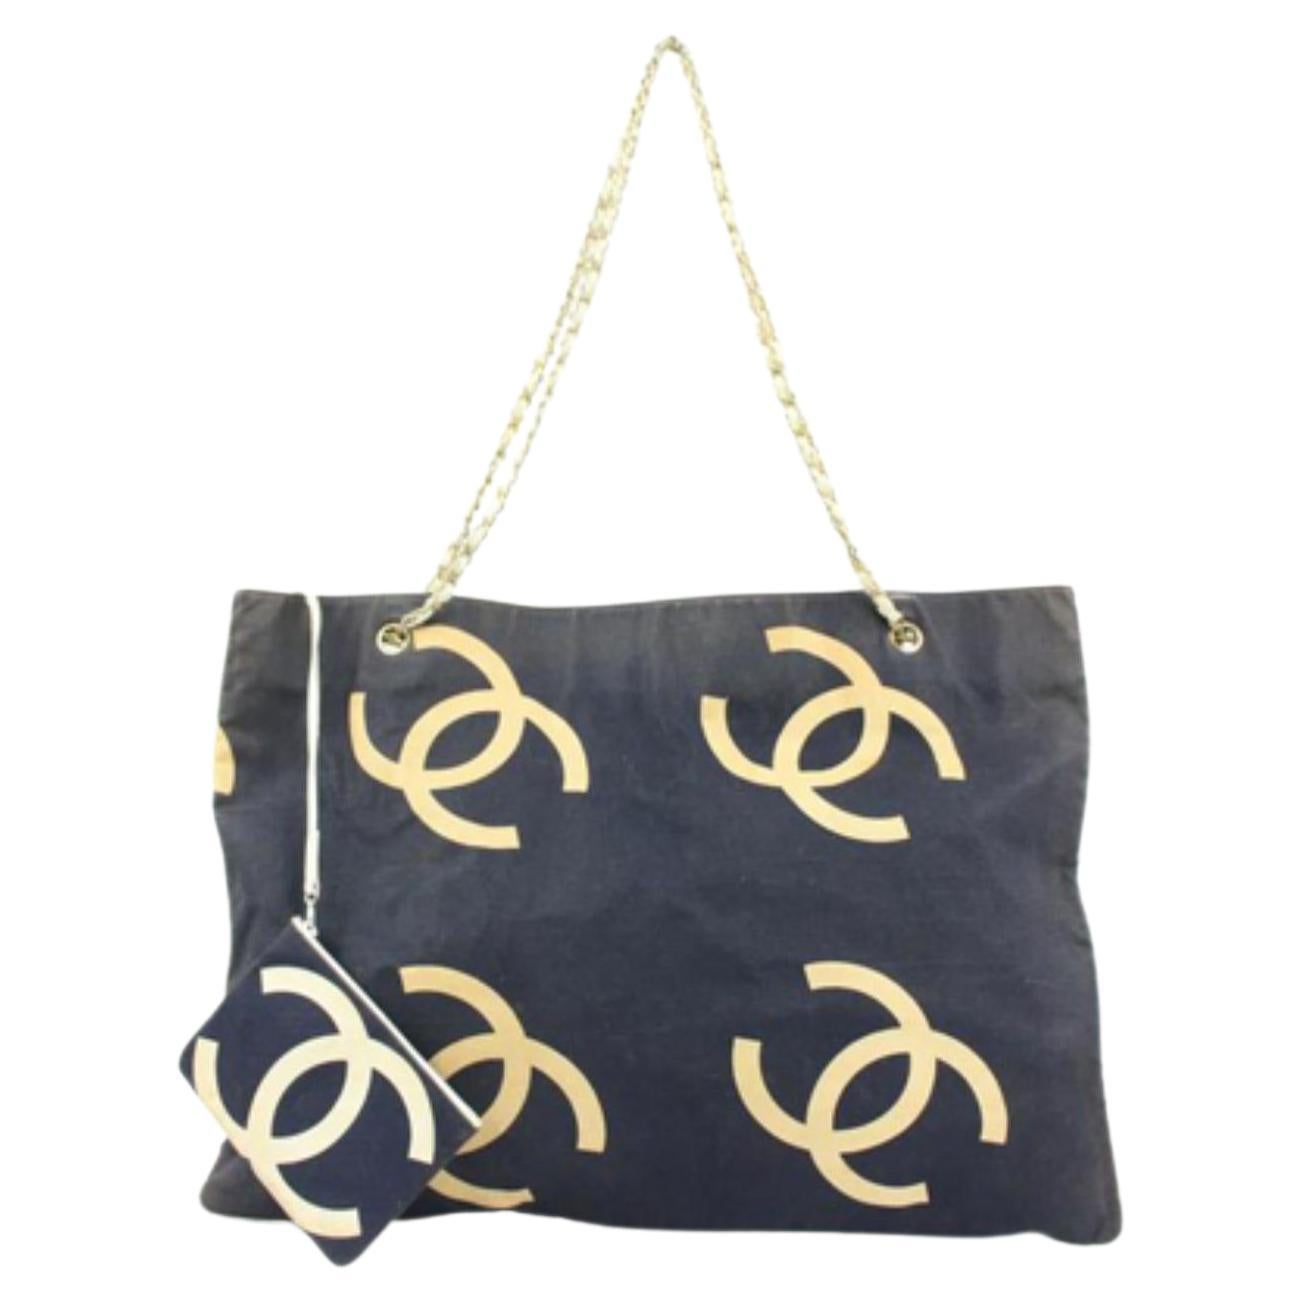 Chanel Navy x Beige Jumbo CC Chain Tote with Pouch 66c23s For Sale